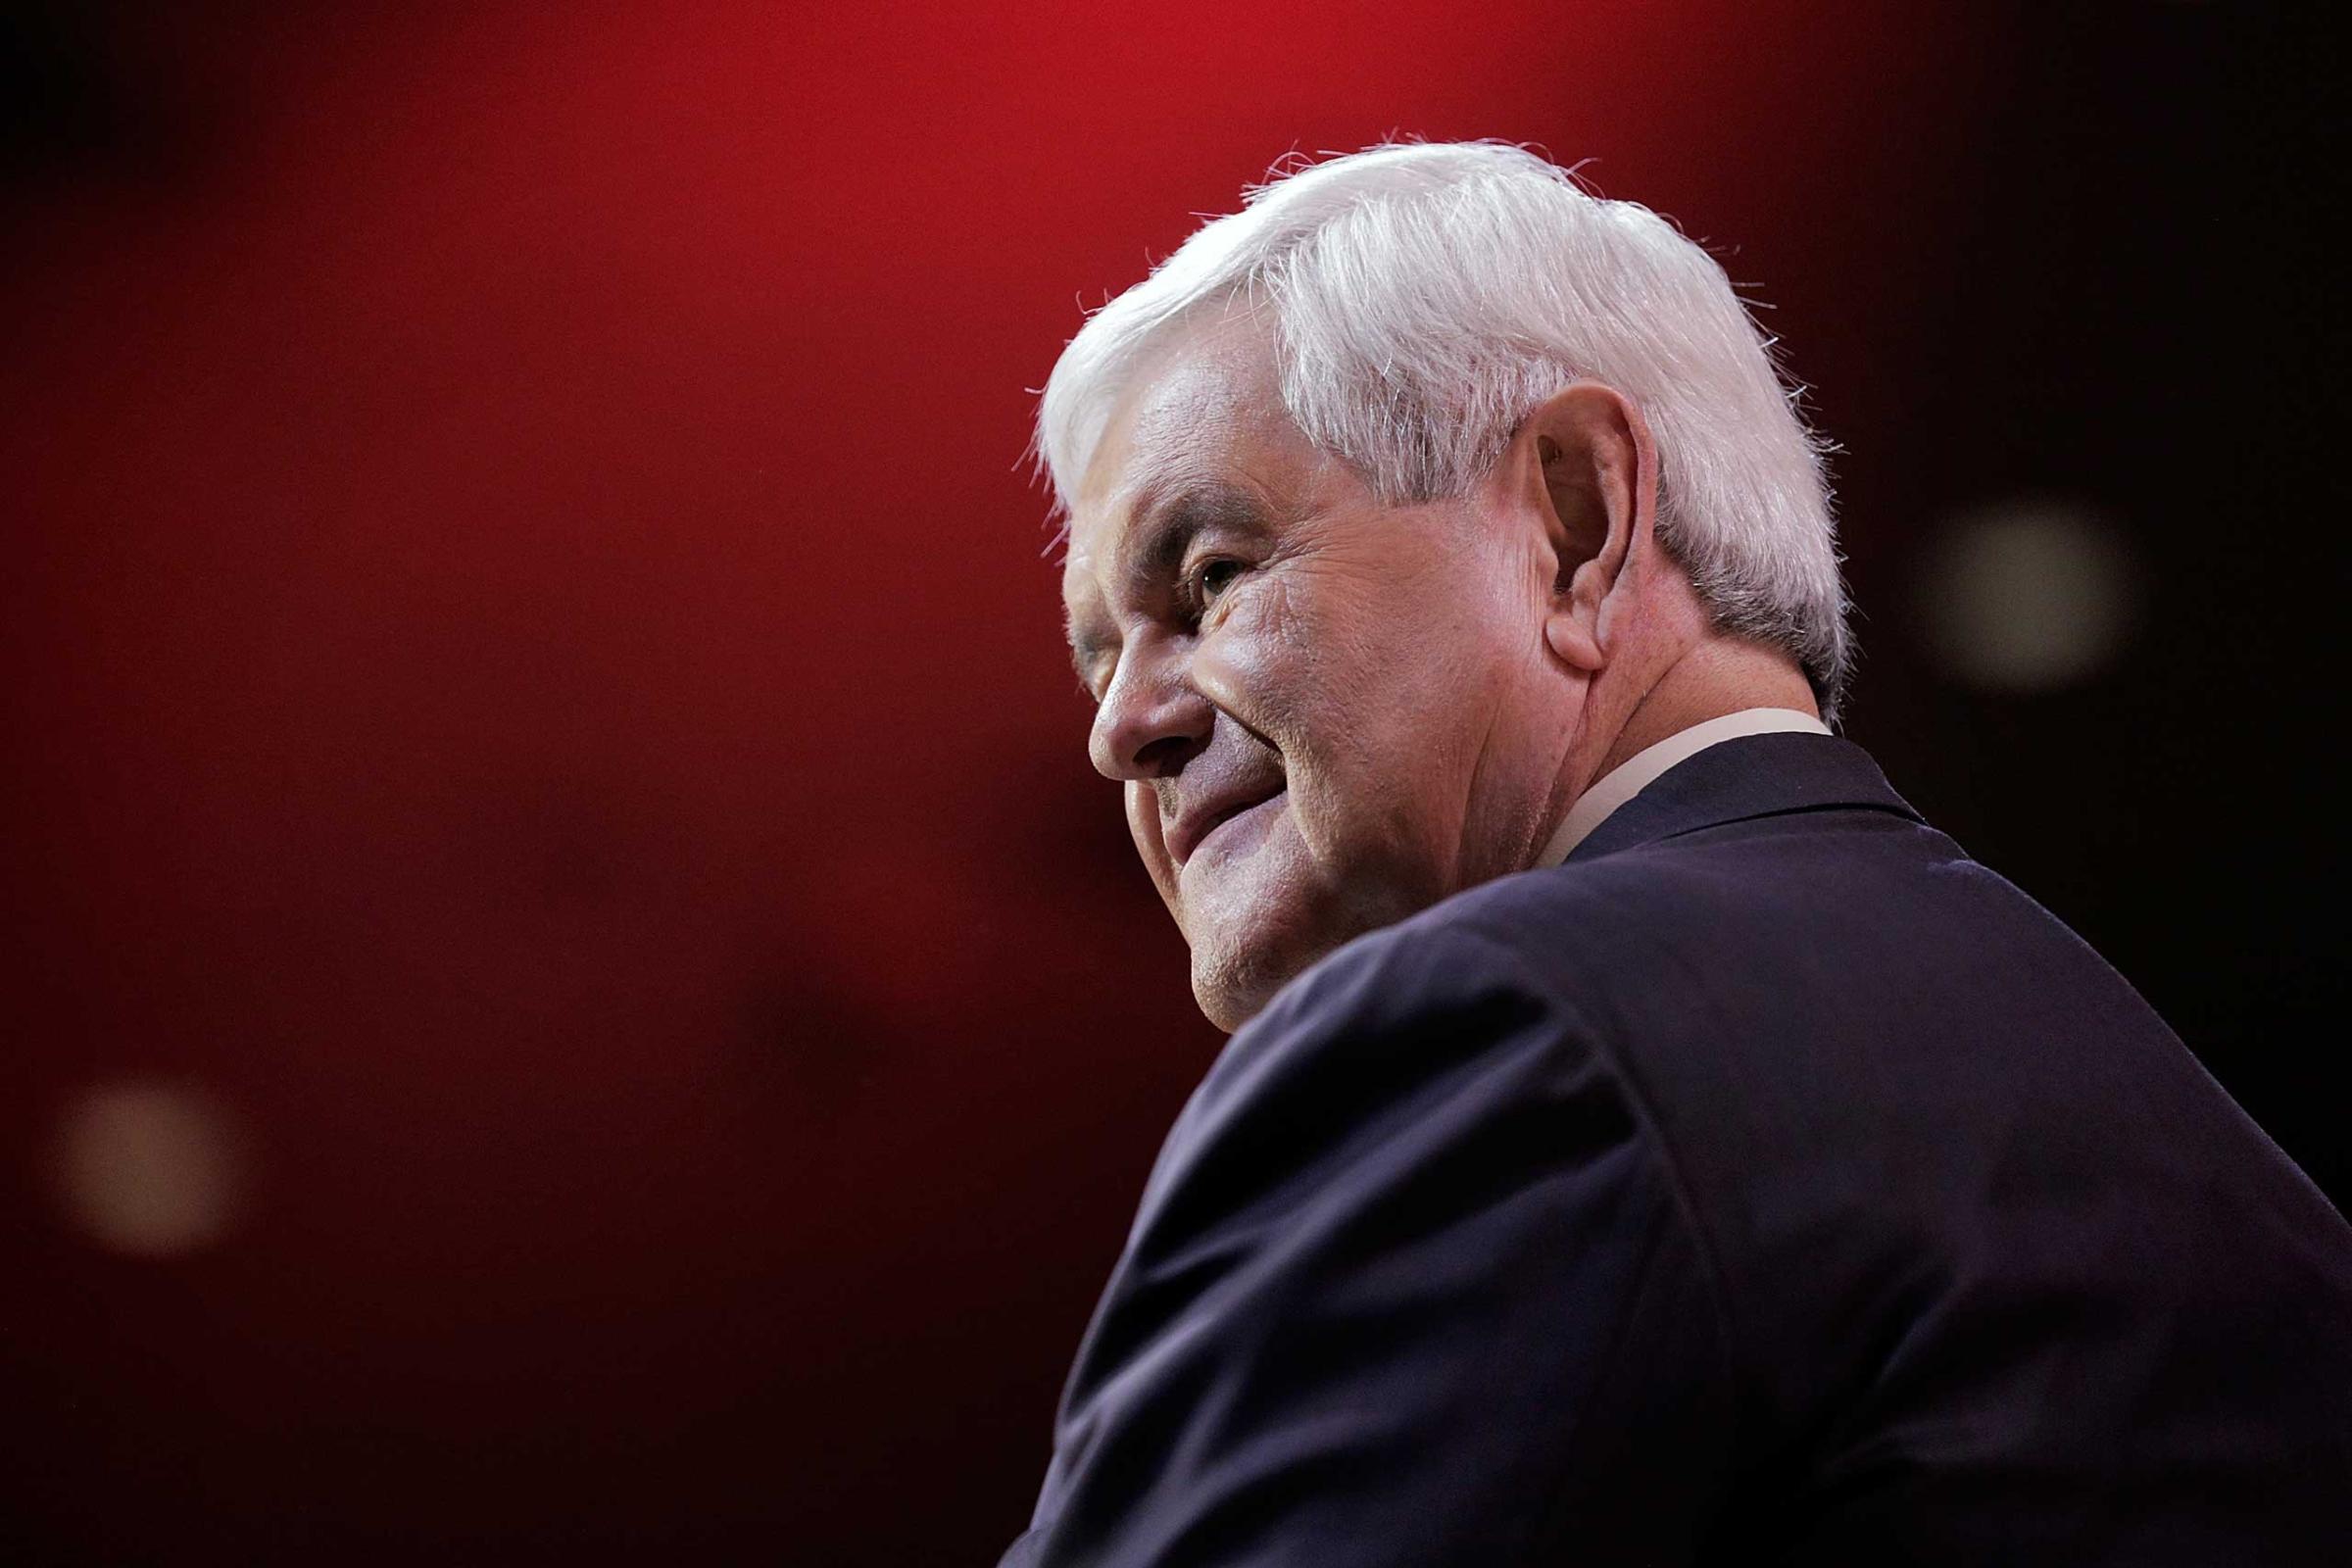 NATIONAL HARBOR, MD - MARCH 08: Newt Gingrich, former speaker of the U.S. House of Representatives, speaks during the 41st annual Conservative Political Action Conference at the Gaylord International Hotel and Conference Center on March 8, 2014 in National Harbor, Maryland. The conference, a project of the American Conservative Union, brings together conservatives polticians, pundits and voters for three days of speeches and workshops. (Photo by T.J. Kirkpatrick/Getty Images)